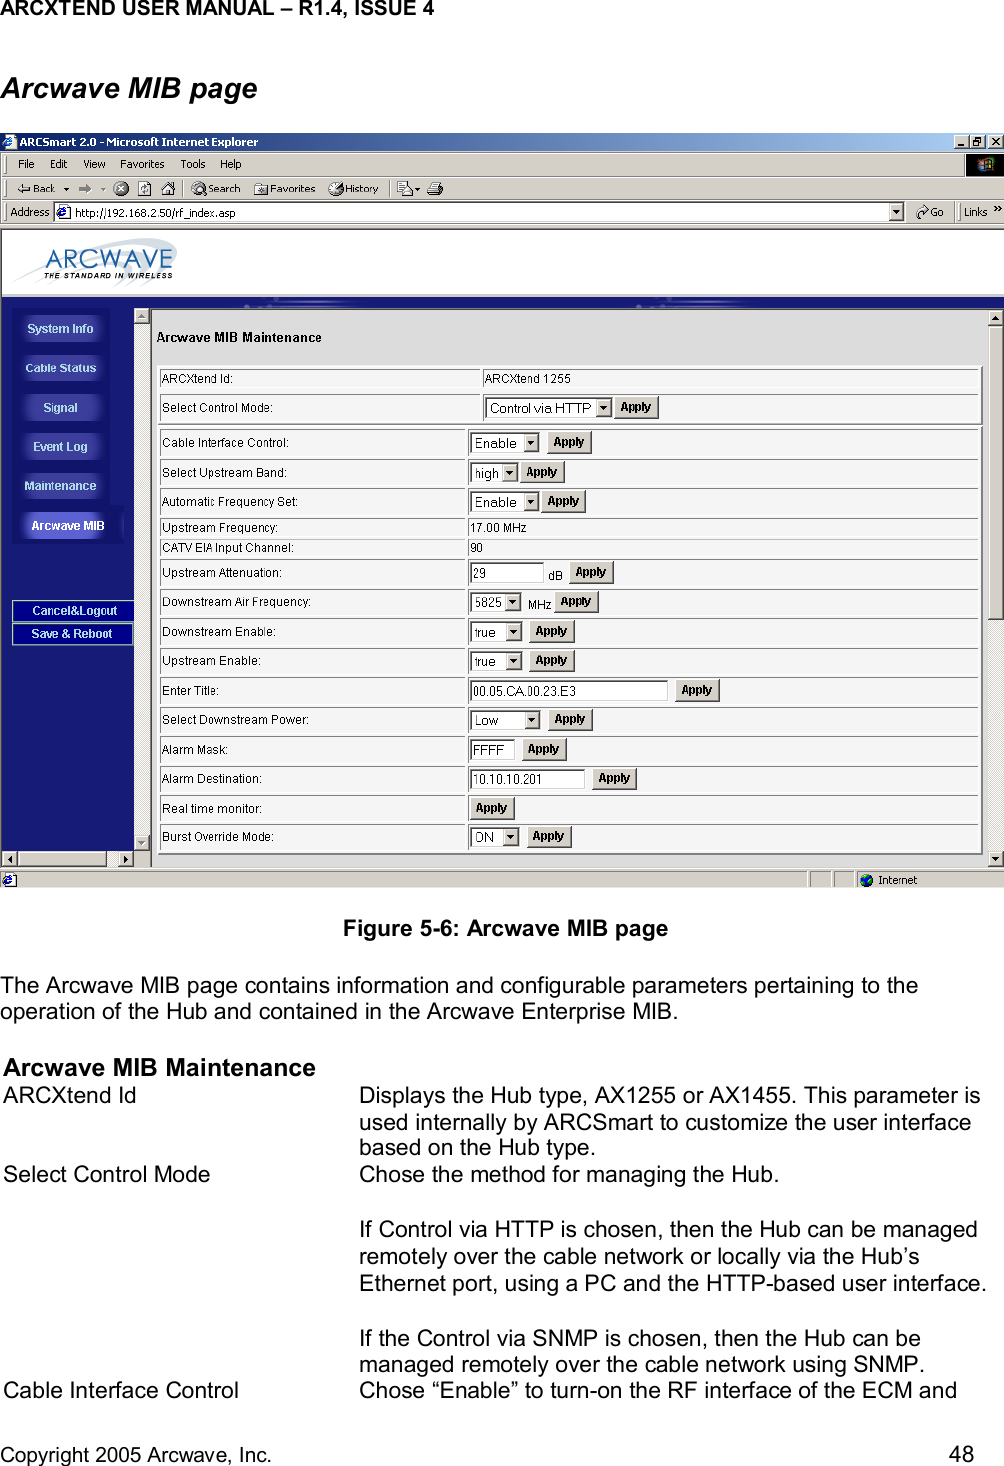 ARCXTEND USER MANUAL – R1.4, ISSUE 4  Copyright 2005 Arcwave, Inc.    48 Arcwave MIB page  Figure 5-6: Arcwave MIB page The Arcwave MIB page contains information and configurable parameters pertaining to the operation of the Hub and contained in the Arcwave Enterprise MIB.  Arcwave MIB Maintenance ARCXtend Id  Displays the Hub type, AX1255 or AX1455. This parameter is used internally by ARCSmart to customize the user interface based on the Hub type.  Select Control Mode  Chose the method for managing the Hub.  If Control via HTTP is chosen, then the Hub can be managed remotely over the cable network or locally via the Hub’s Ethernet port, using a PC and the HTTP-based user interface.If the Control via SNMP is chosen, then the Hub can be managed remotely over the cable network using SNMP.  Cable Interface Control  Chose “Enable” to turn-on the RF interface of the ECM and 